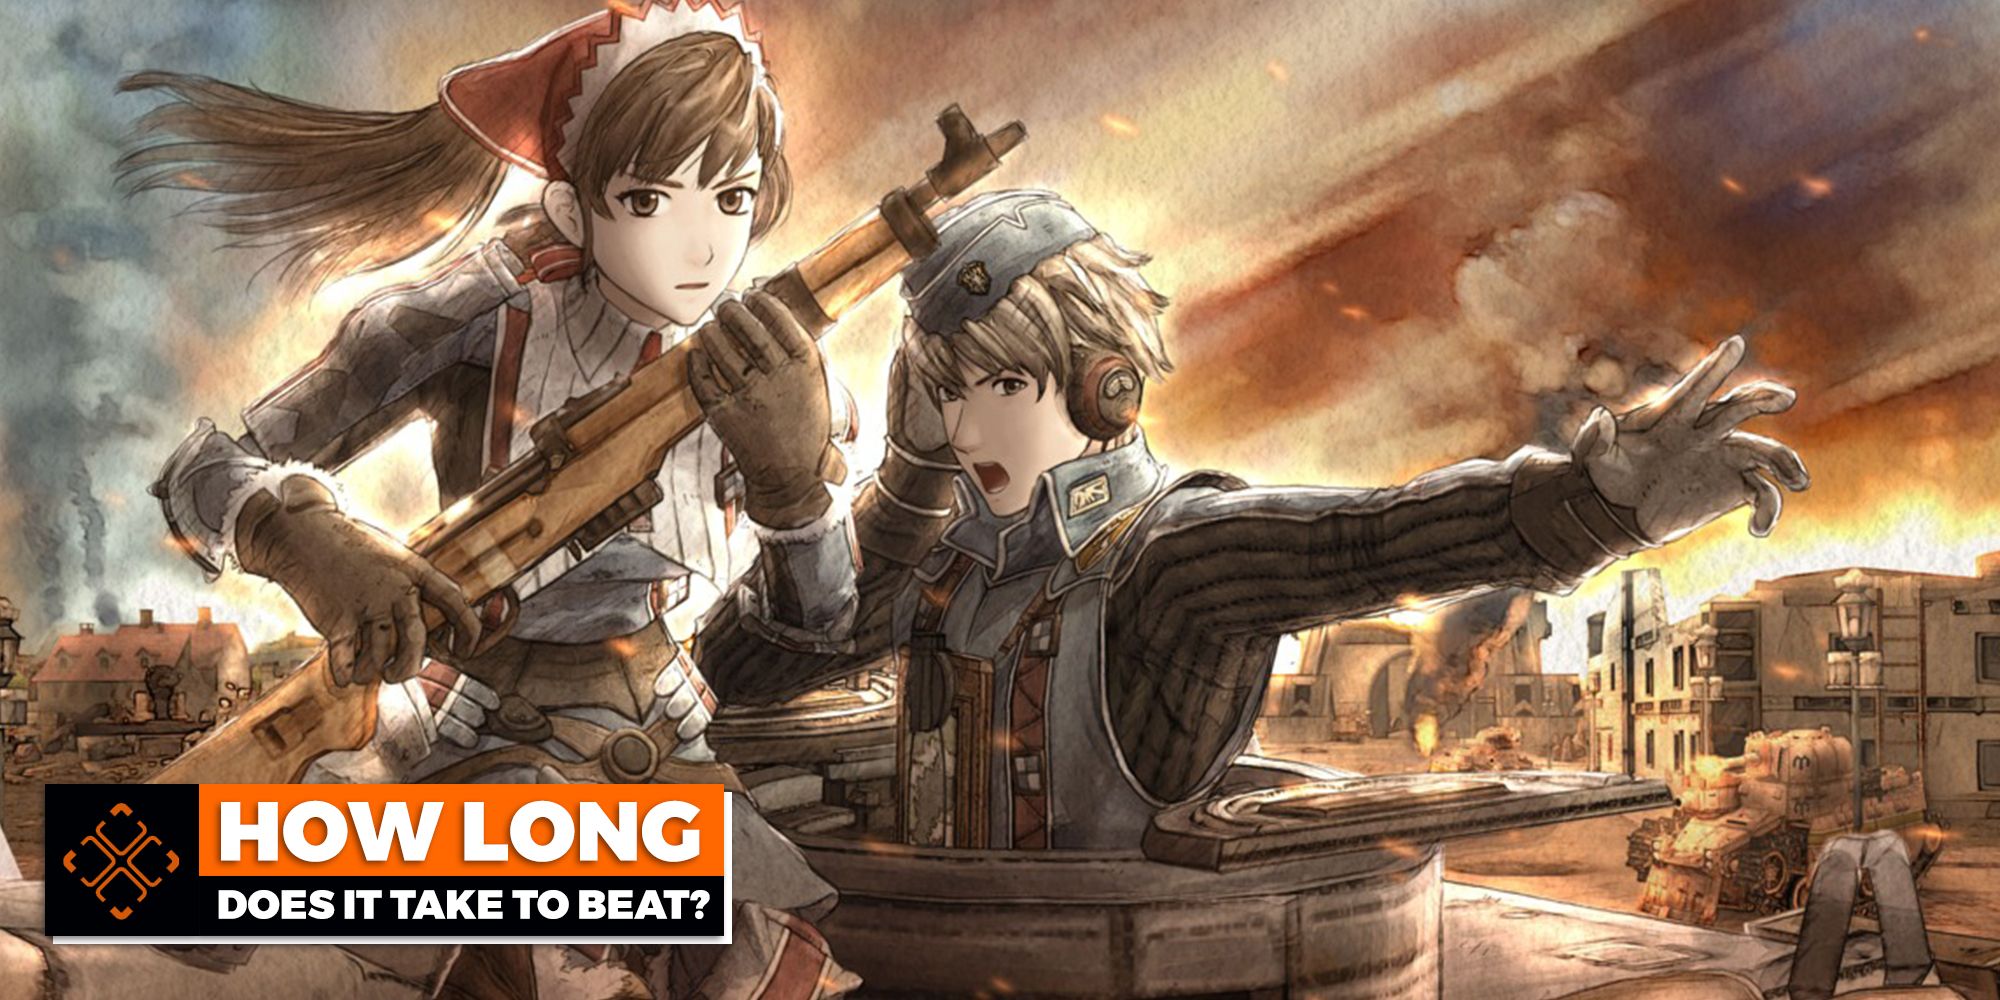 Game art from Valkyria Chronicles.